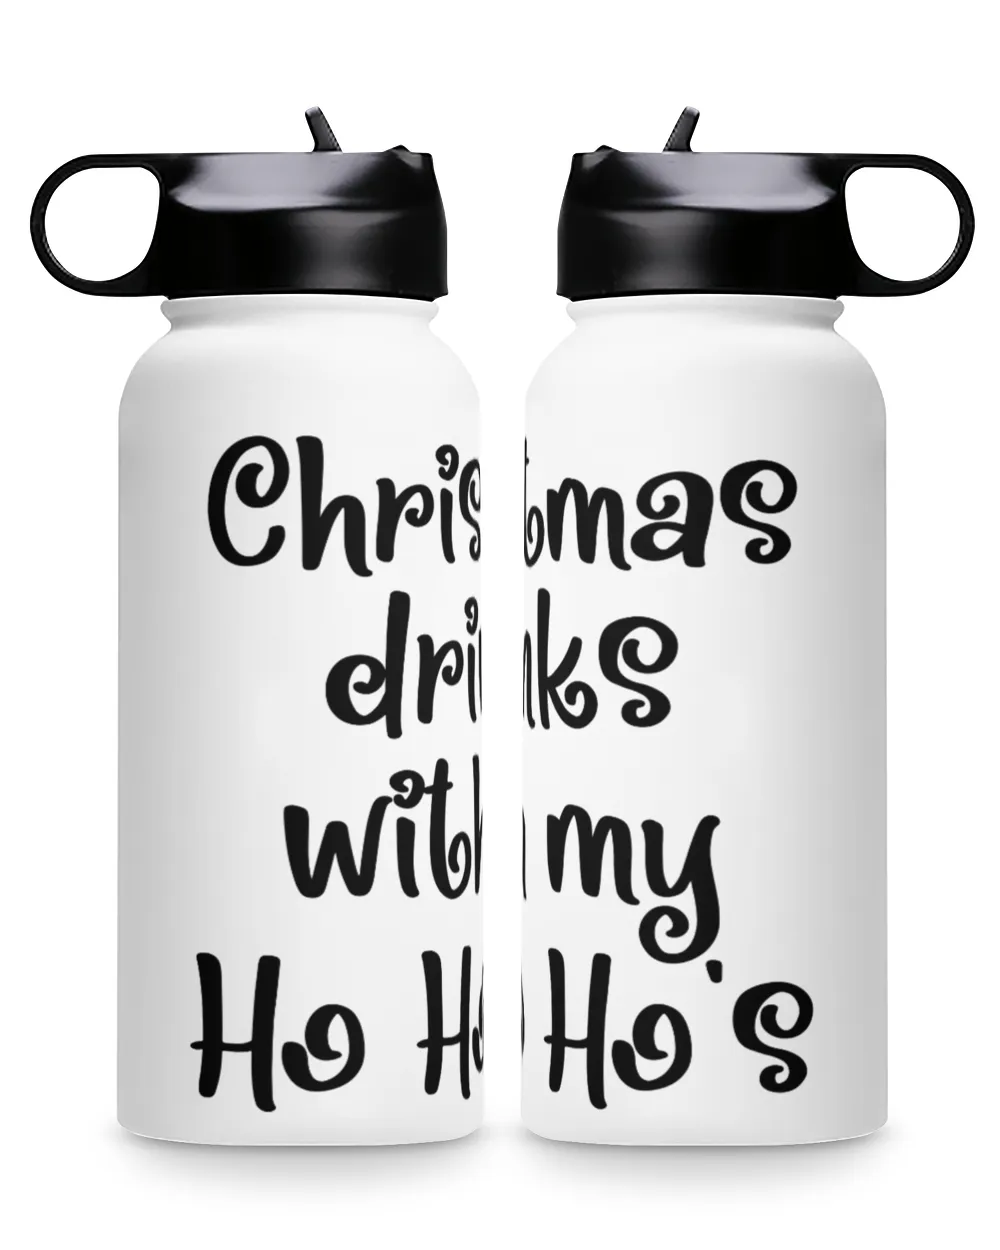 Merry Christmas Drinks With My Ho Ho Ho's Premium Water Bottle